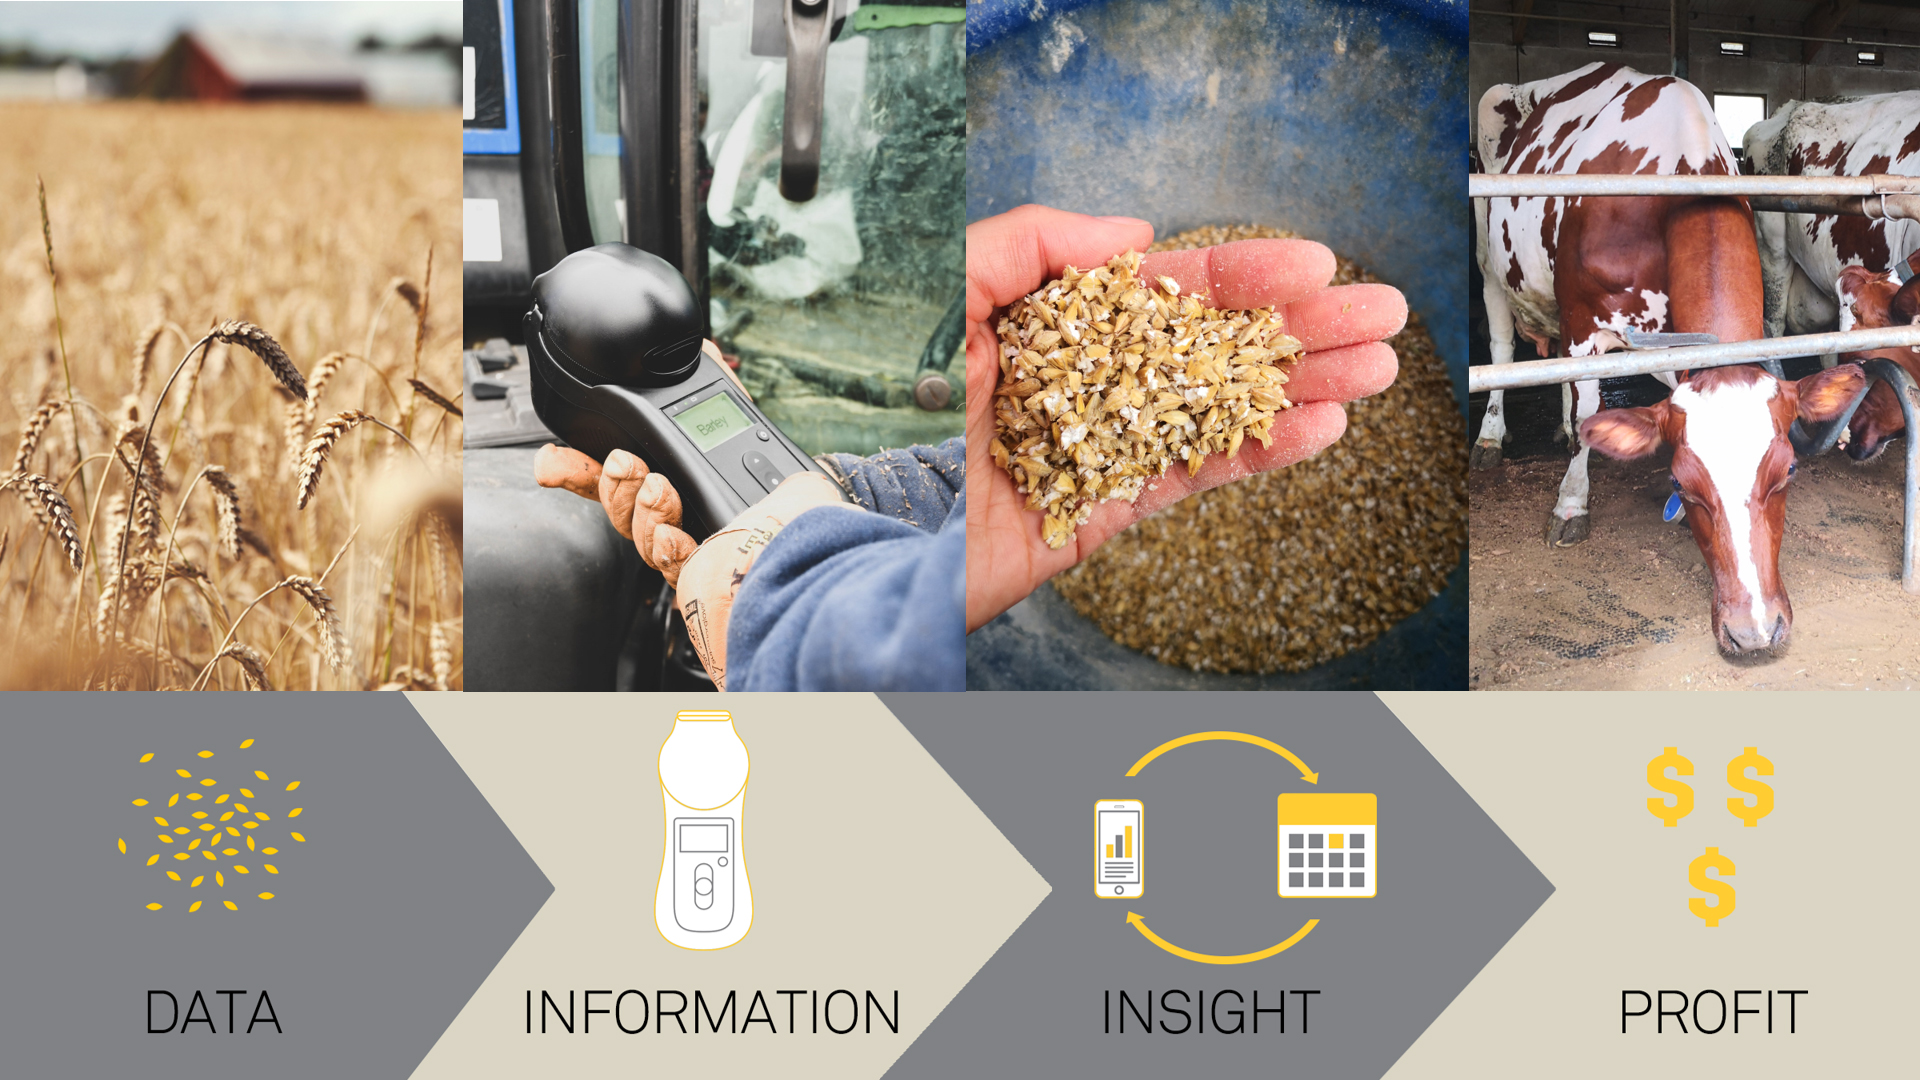 Innovation in animal feed practices to increase the profitability of farms